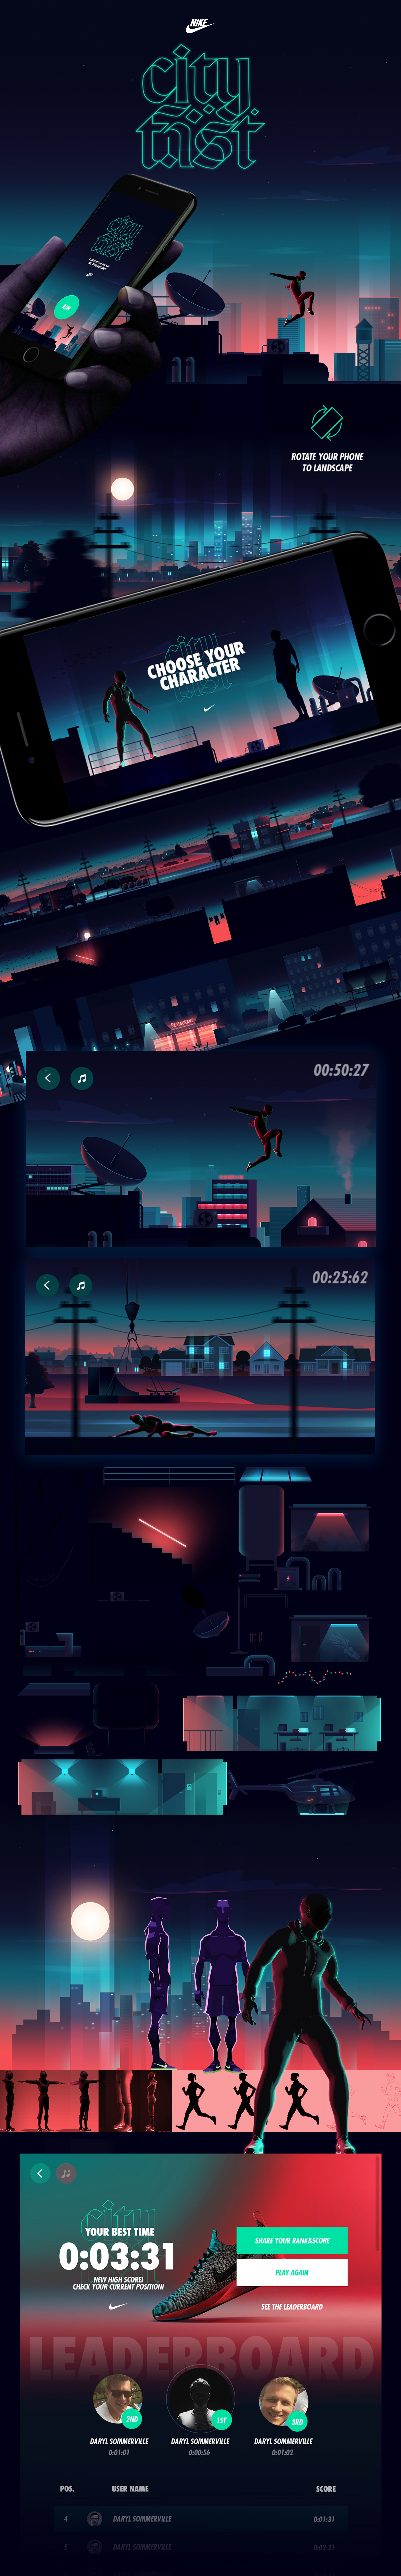 Nike game JD running mobile html5 ios android ILLUSTRATION  Advertising 